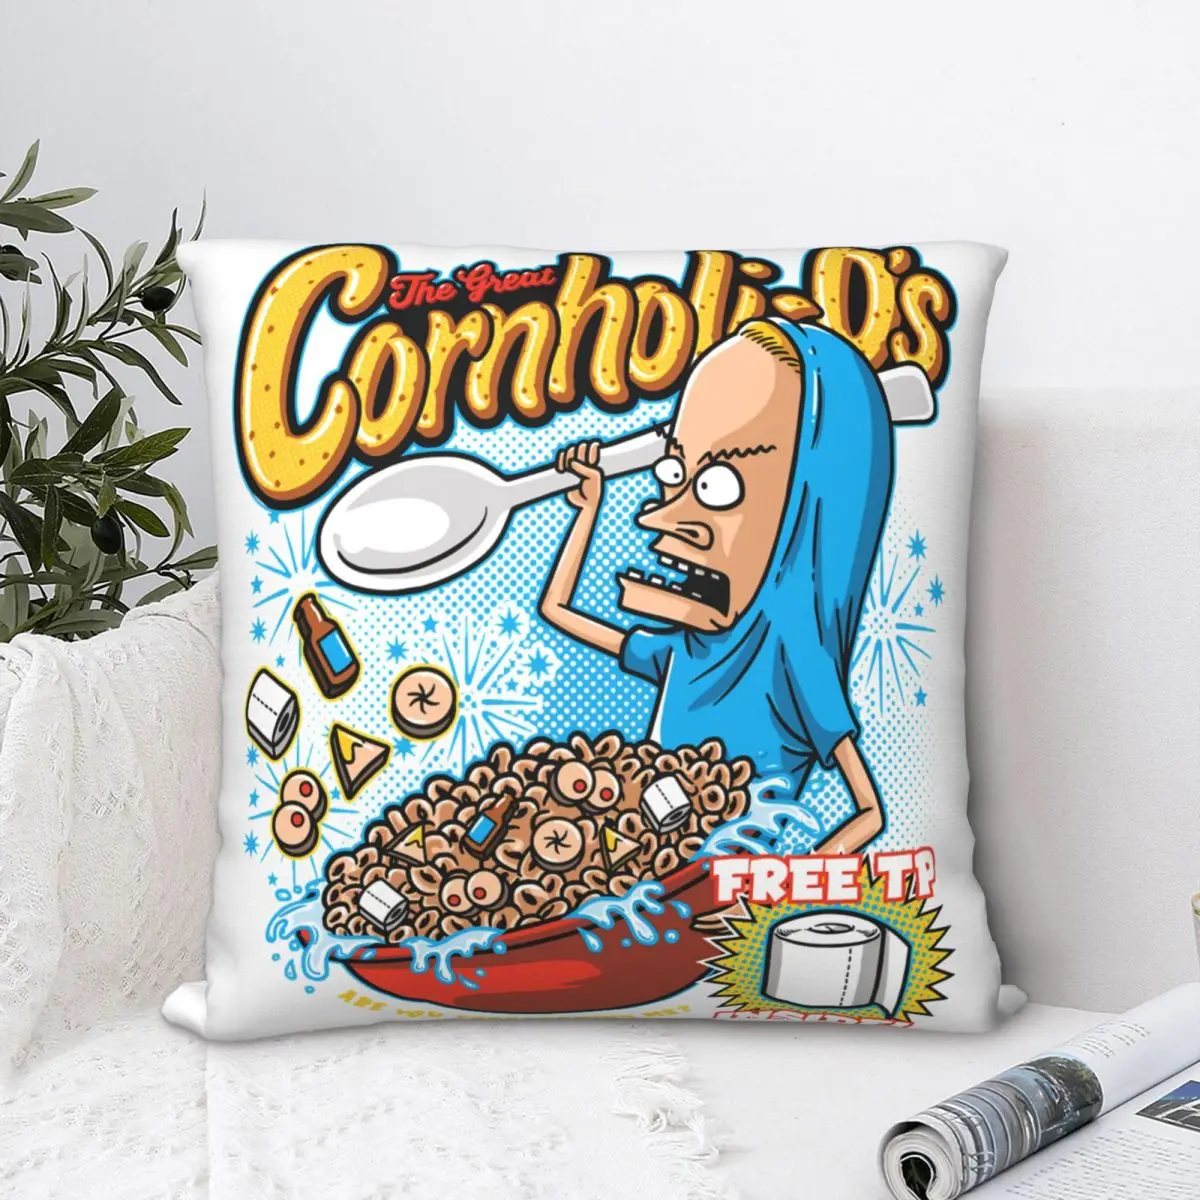 

Cornholi Os Polyester Cushion Cover Beavis and ButtHead Chat Hilarious Animation For Sofa Chair Decorative Washable